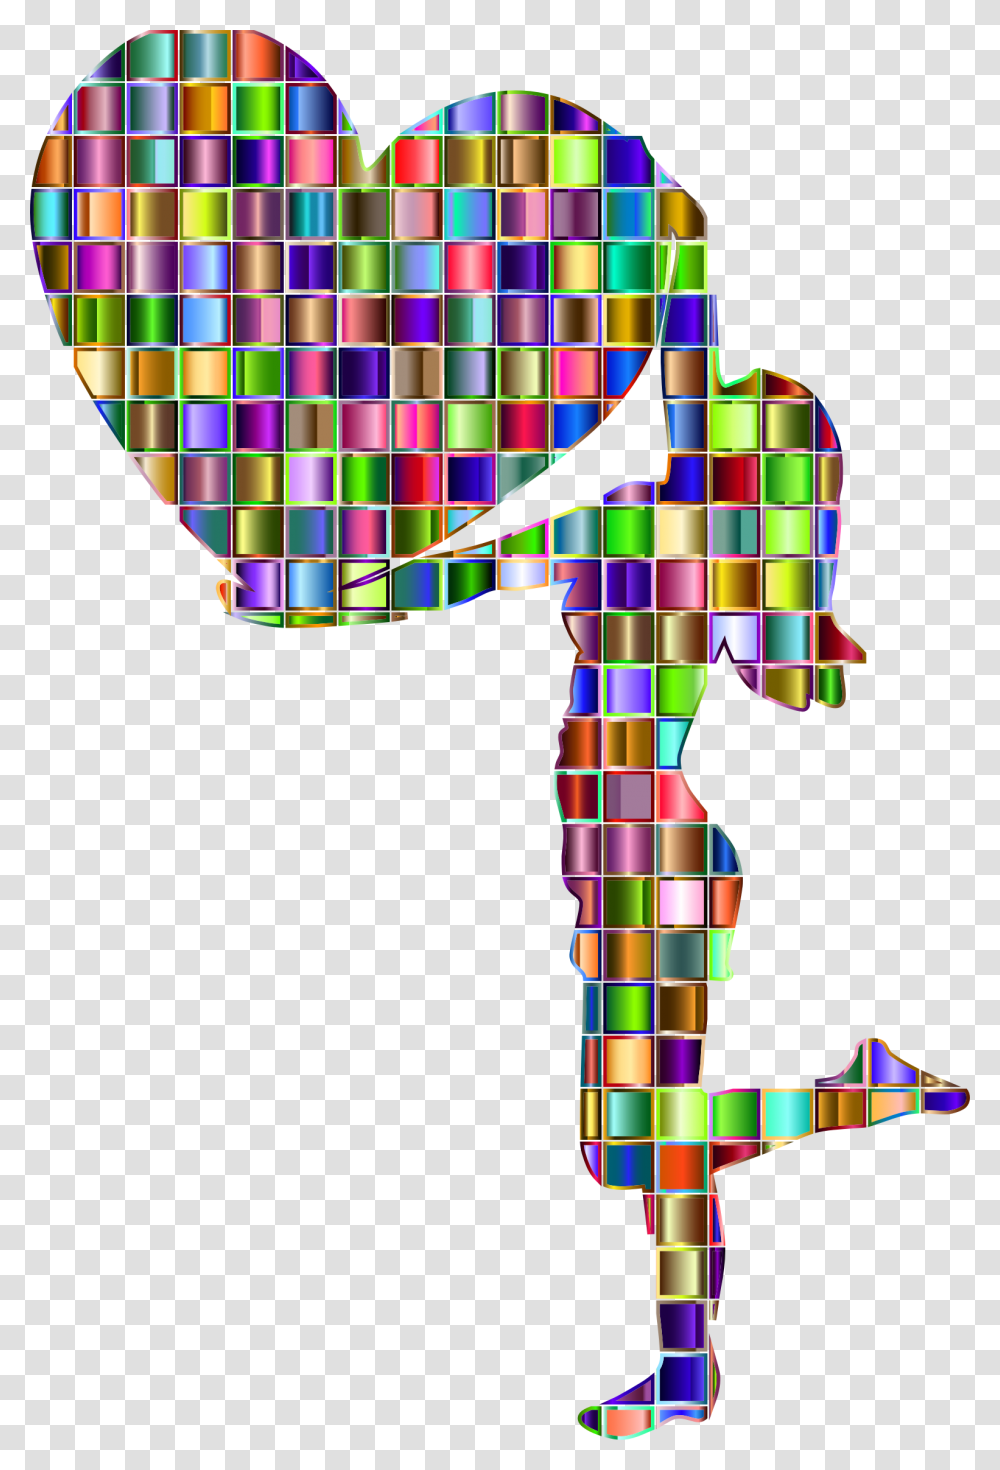 This Free Icons Design Of Chromatic Mosaic Woman Woman With A Big Heart, Urban, Plot, Architecture Transparent Png